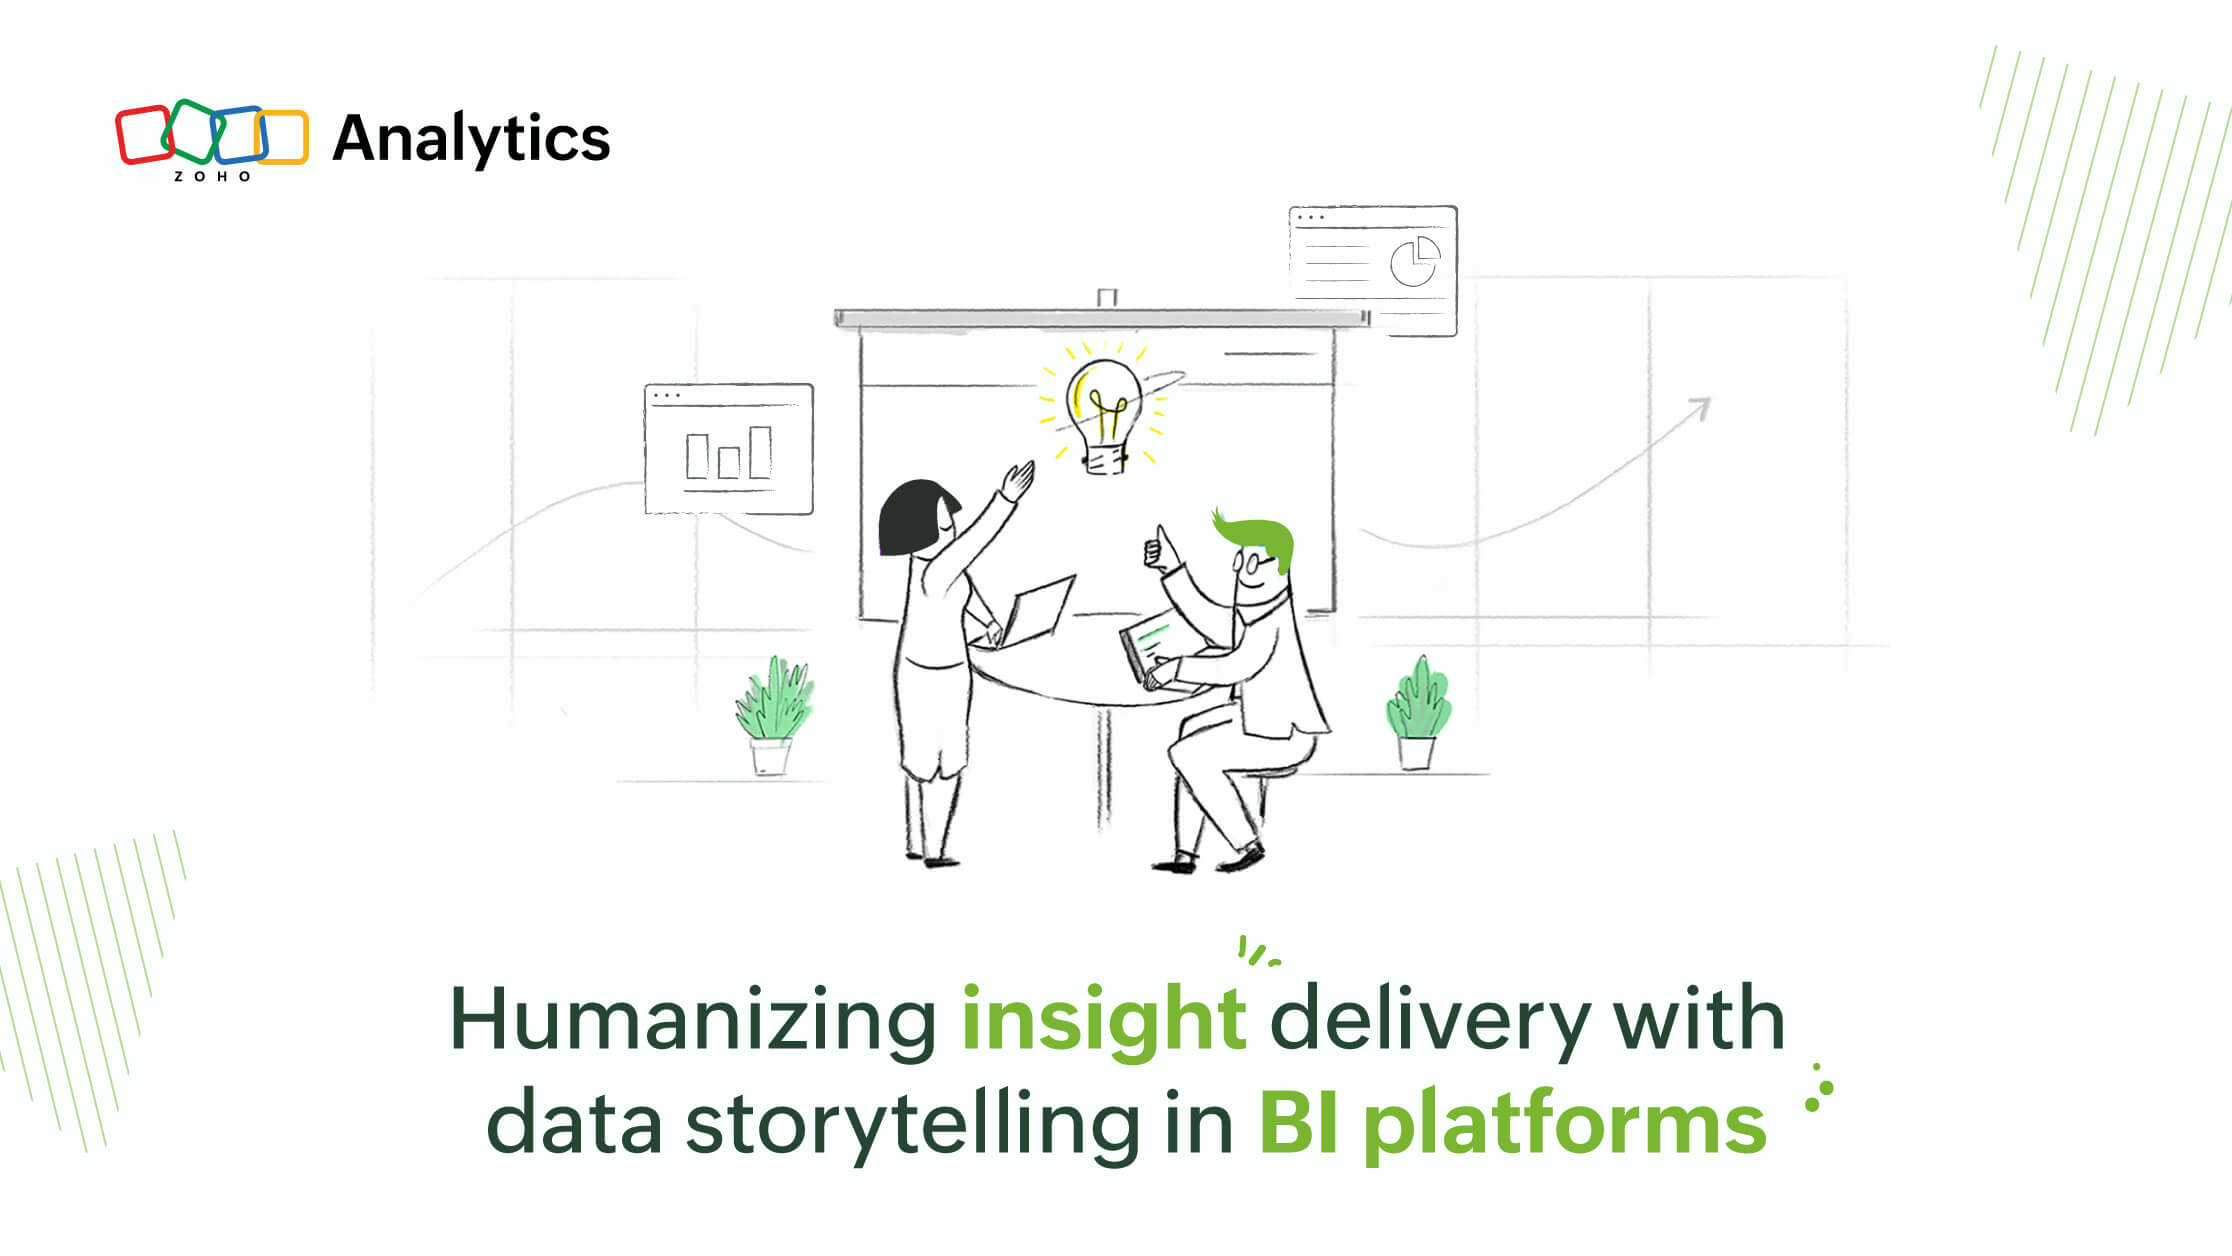 Humanizing insight delivery with data storytelling in BI platforms